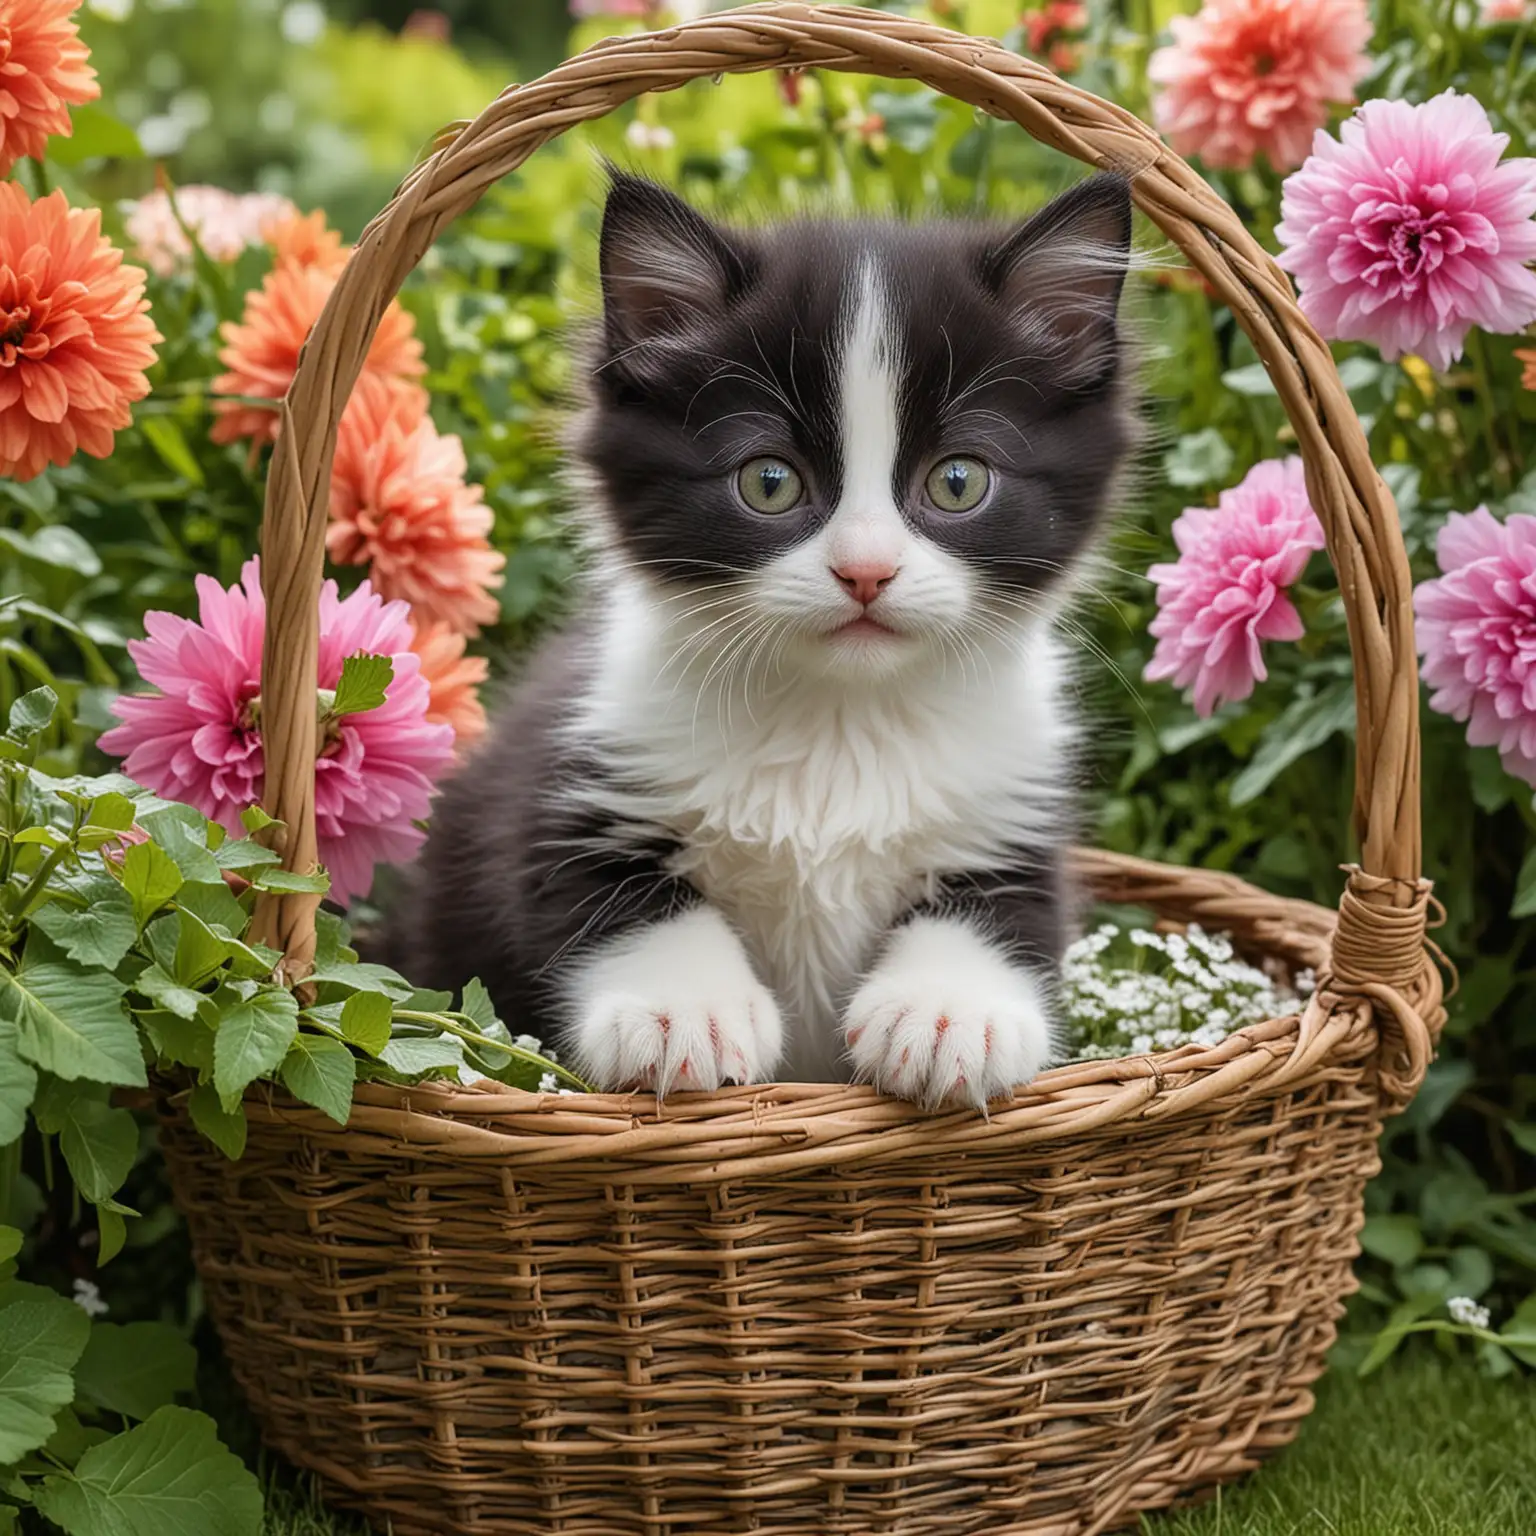 Playful Black and White Kitten Surrounded by Vibrant Flowers in a Lush Garden